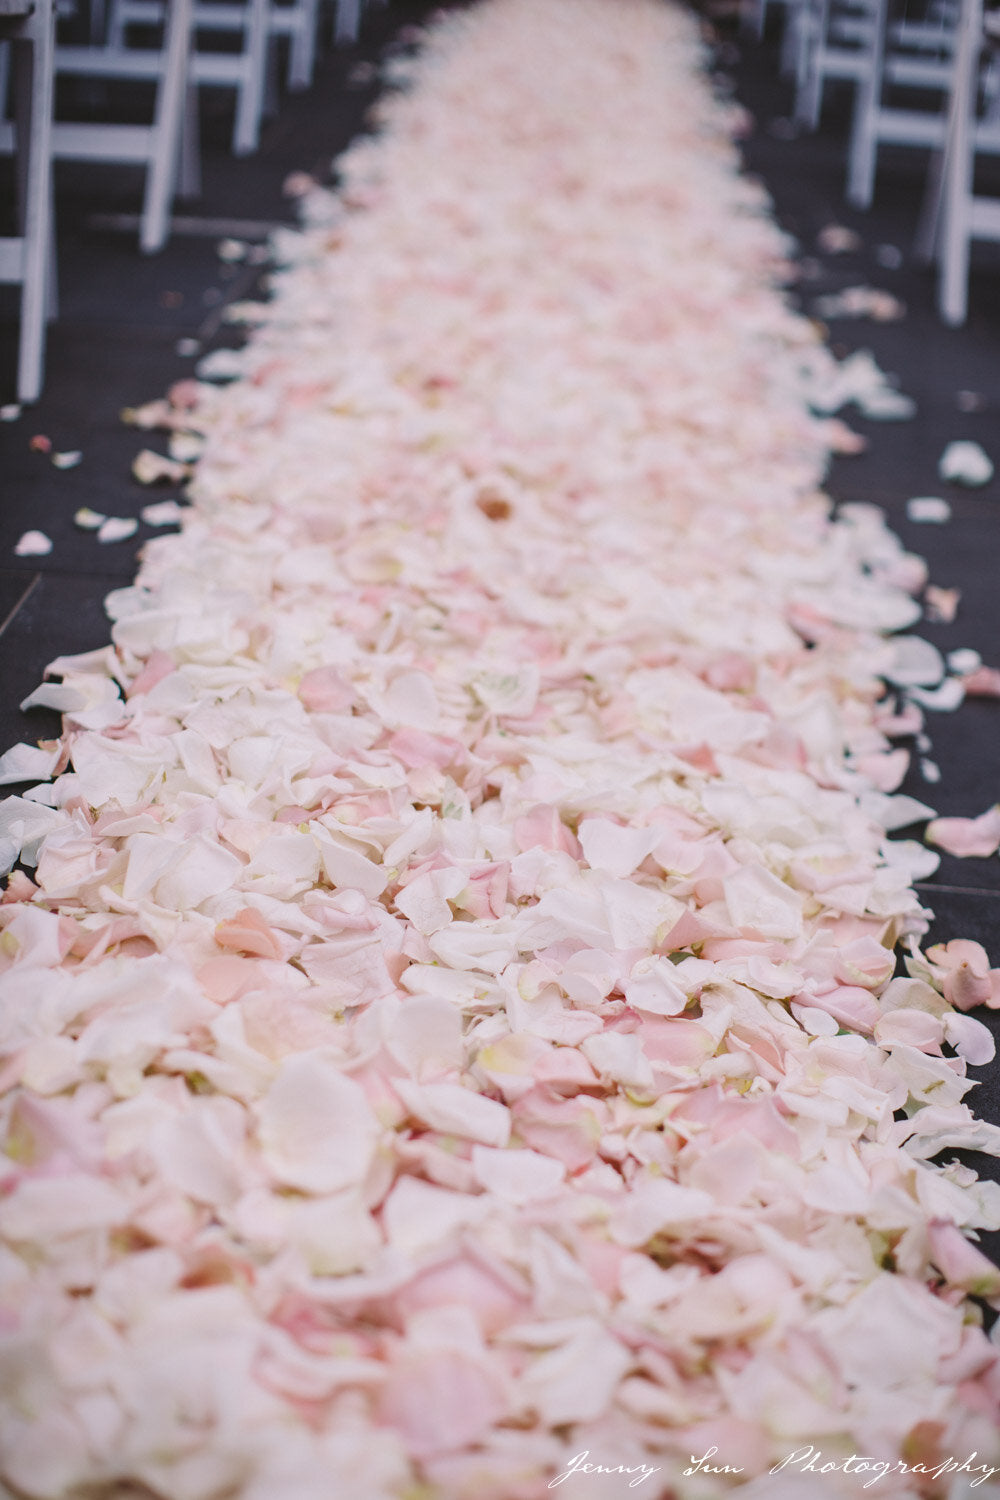 ceremony aisle filled with fresh rose petals